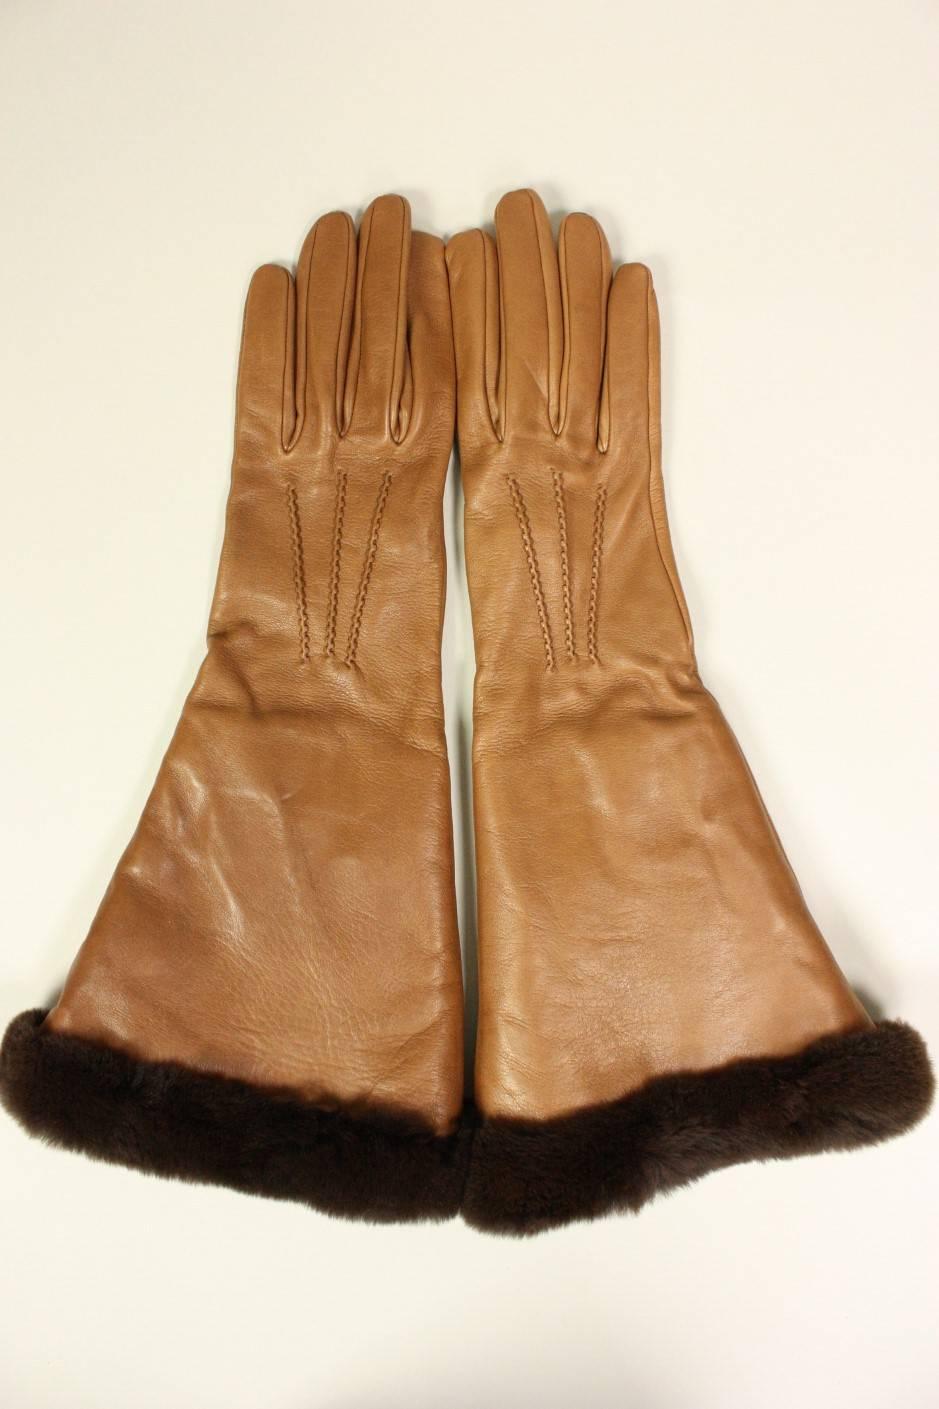 Gauntlet gloves from Hermes are made of buttery-soft, caramel-colored lambskin.  Contrasting dark brown fur trim extends from the glove opening to wrist. Light gray silk jersey lining.  Labeled size 7.